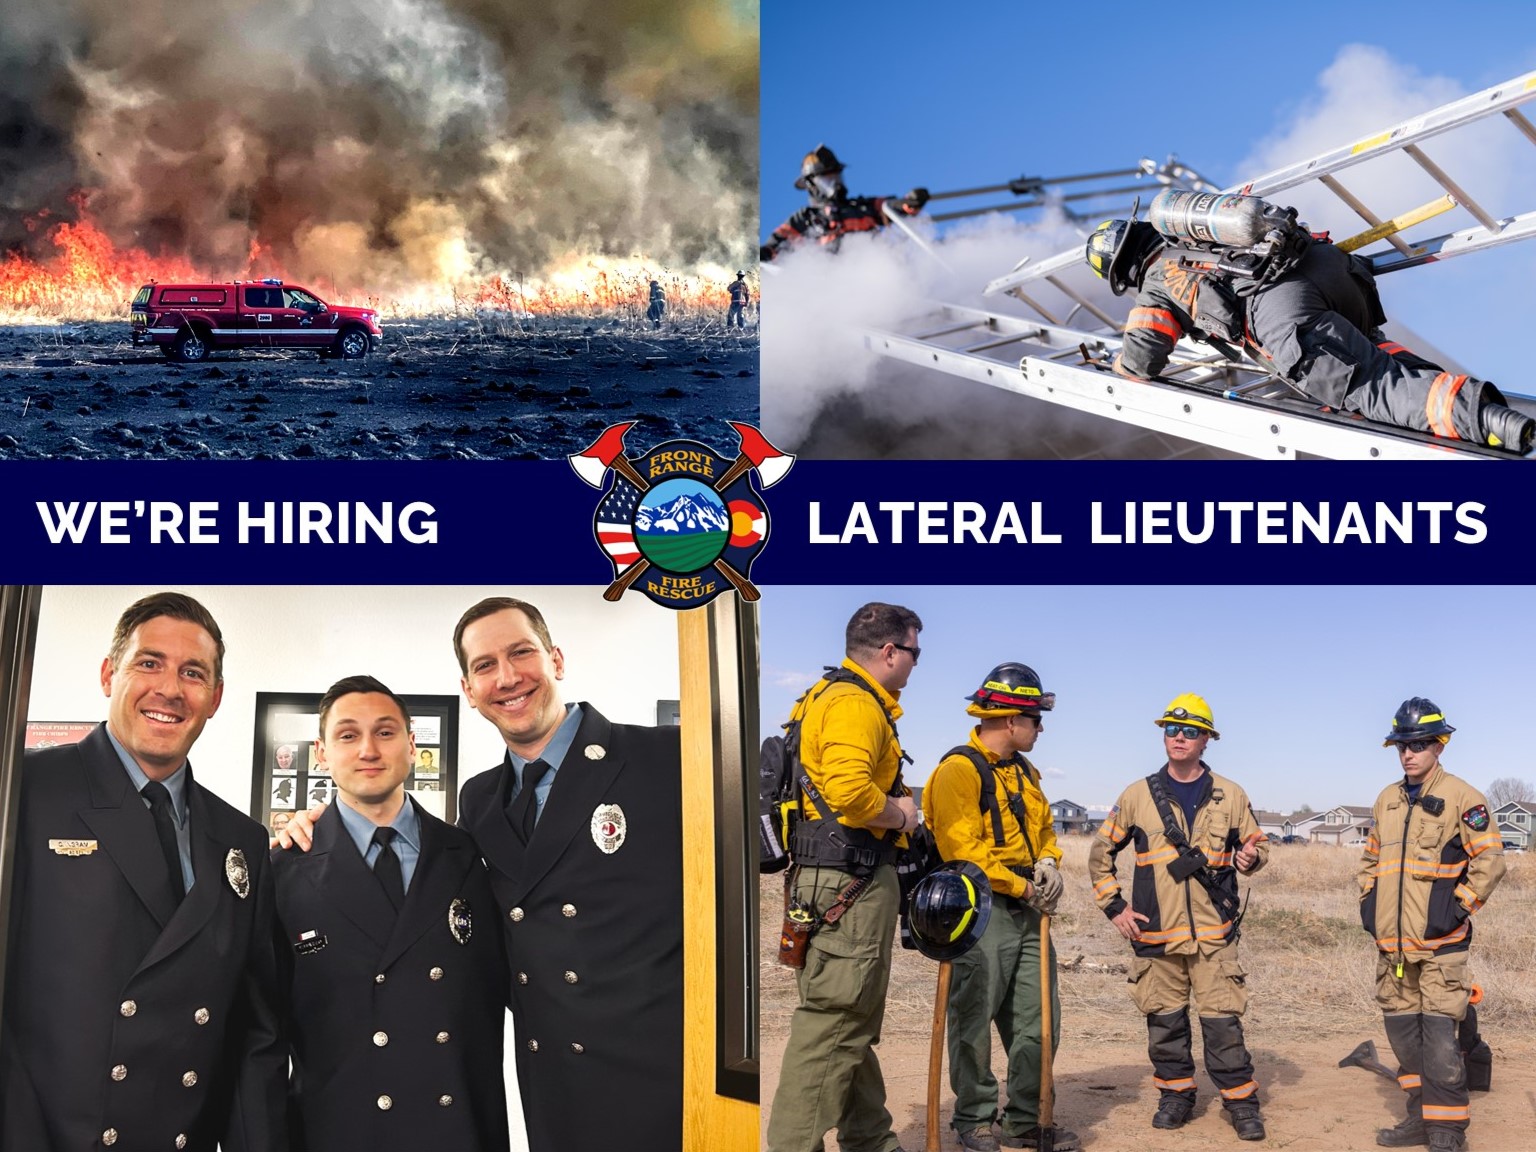 We're hiring lateral lieutenants. pics of firefighters in action on the job